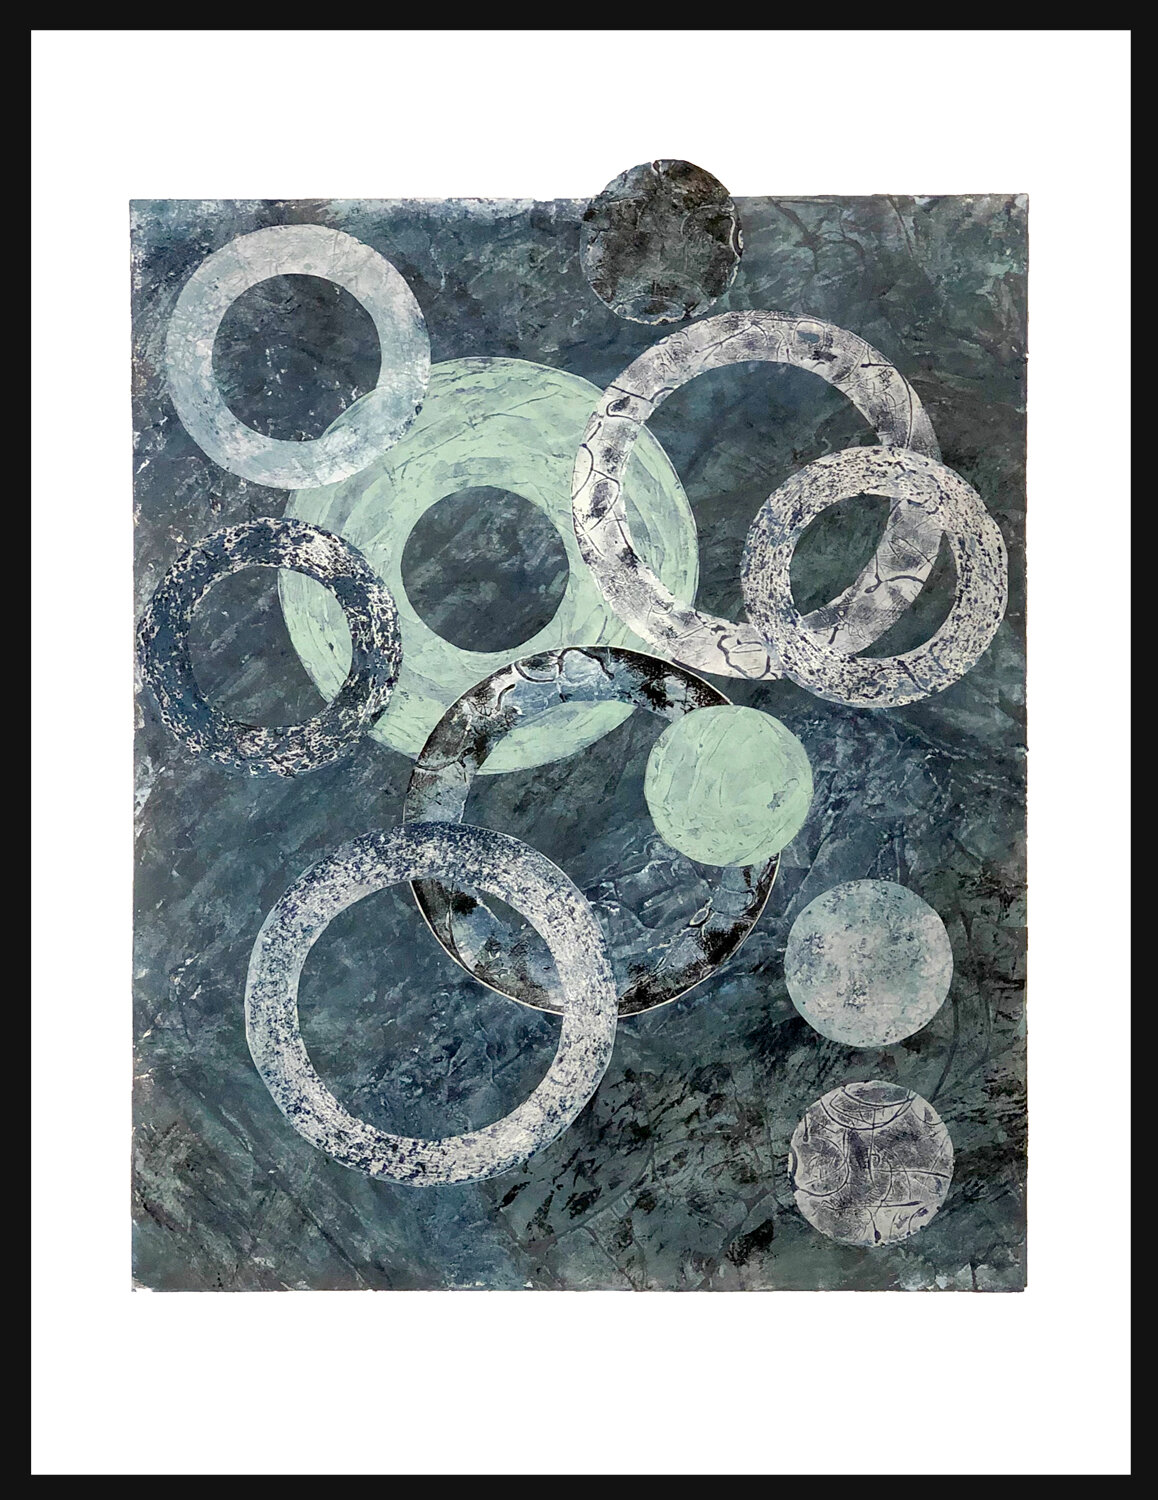  The word   Talisman   is traced to the ancient verb “talien” which means ‘initiate into the mysteries,’ typically an inscribed ring or stone meant to bring good luck. Wishing you all good luck. 28.75 x 23.75 Collagraph and collage,  1/1   $835   Shi